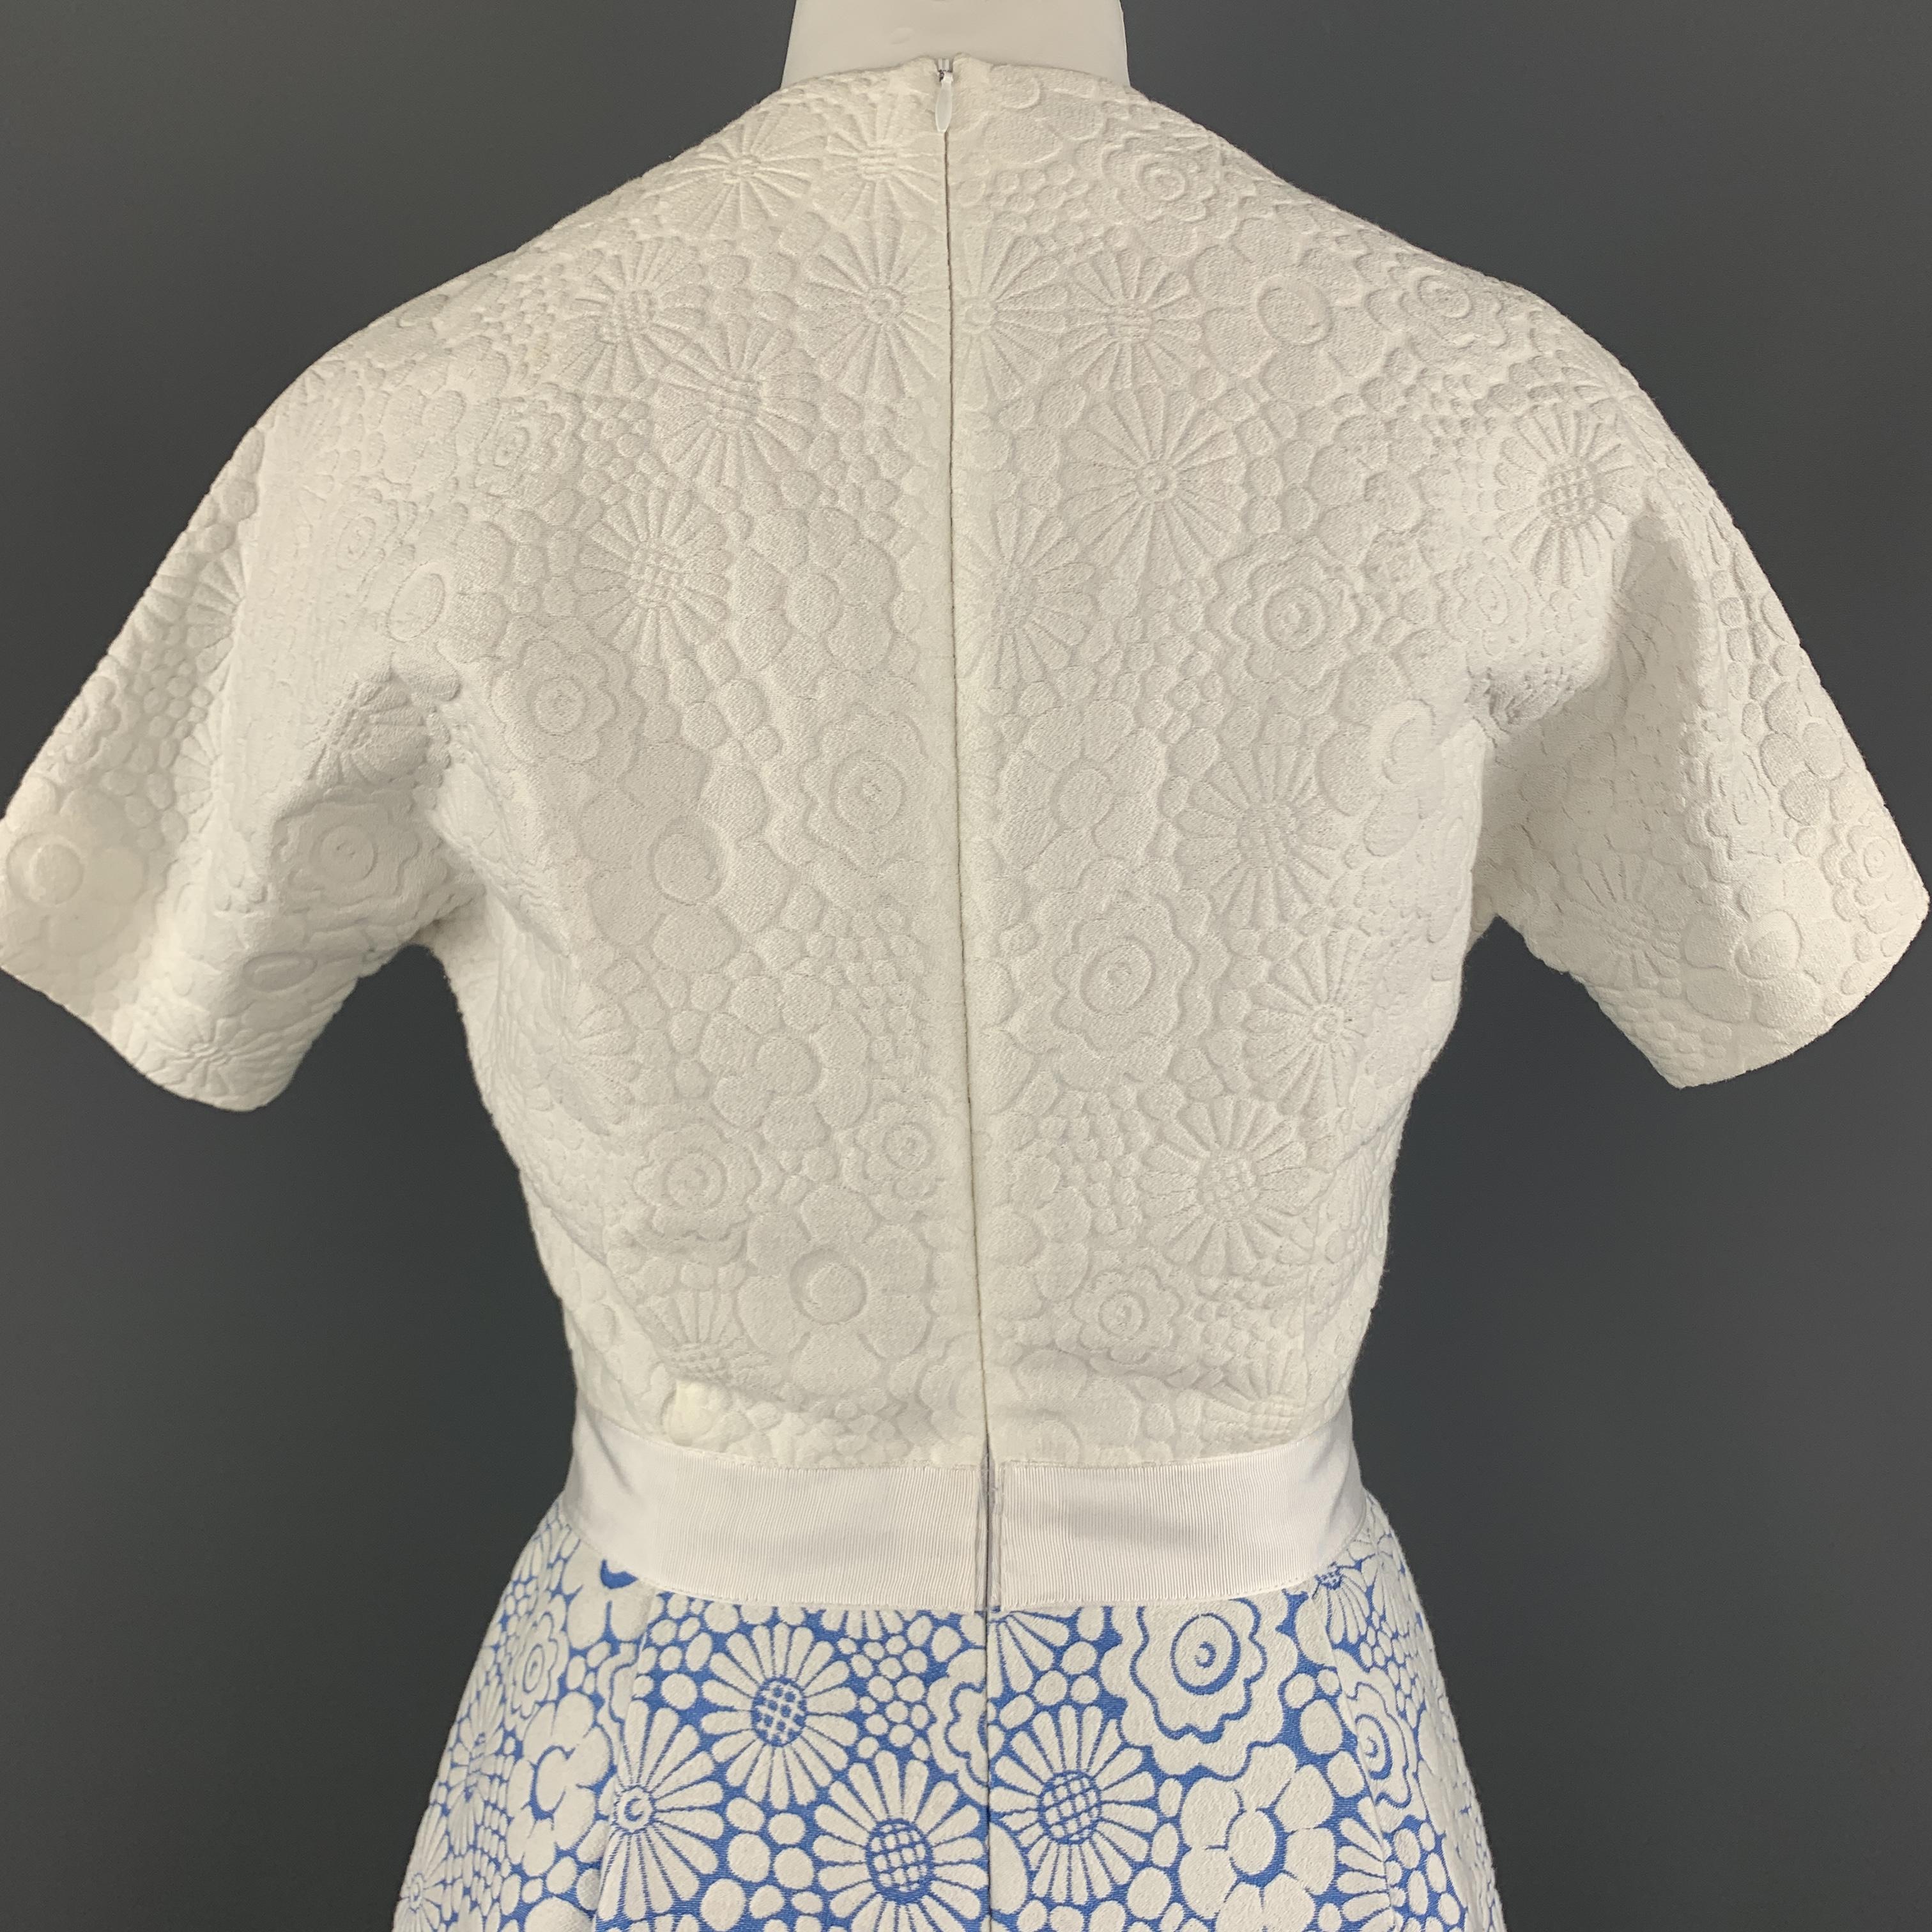 THOM BROWNE Size 2 White Floral Textured Blue Panel Structured Dress Spring 2013 5